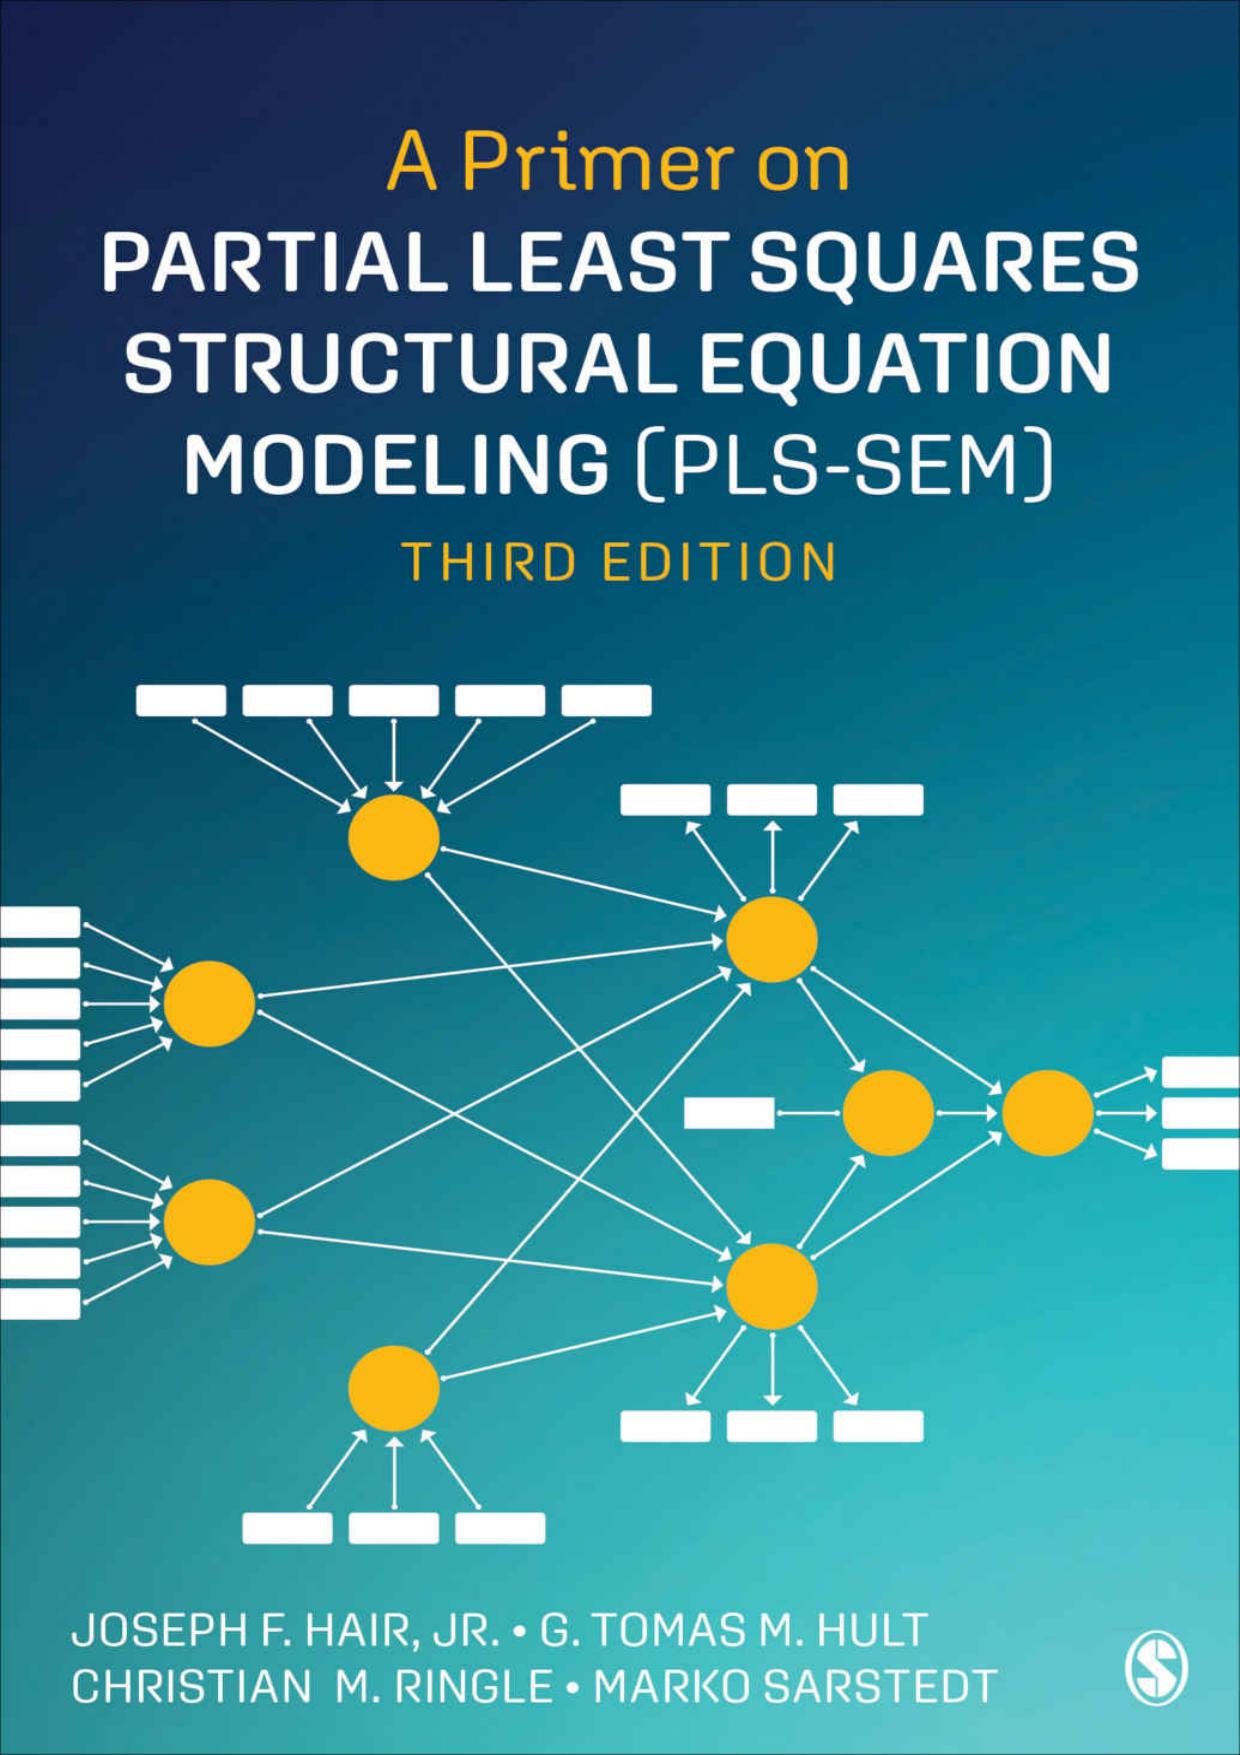 (eBook PDF)A Primer on Partial Least Squares Structural Equation Modeling 3rd Edition by Jr. Hair, Joe,G. Tomas M. Hult